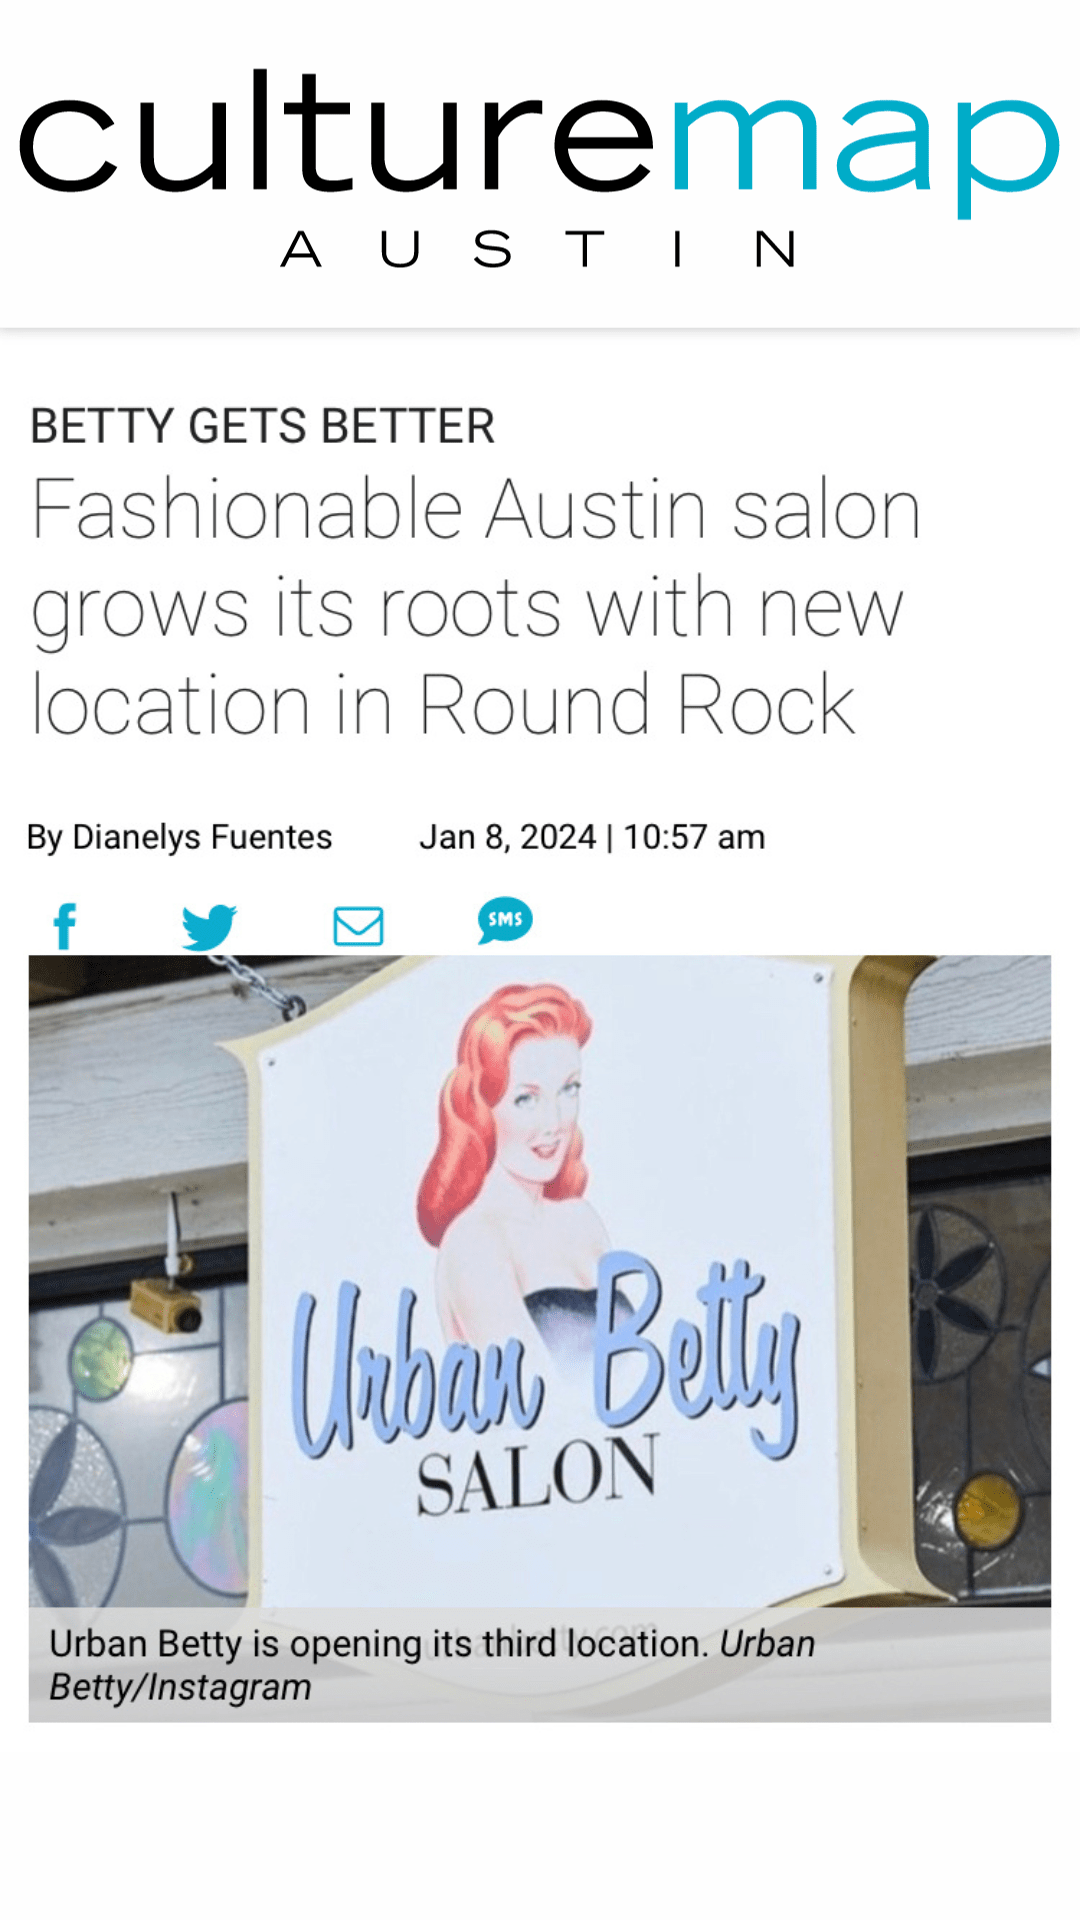 Betty gets Better, Fashionable Austin salon, Urban Betty, grows its roots with new location in Round Rock.